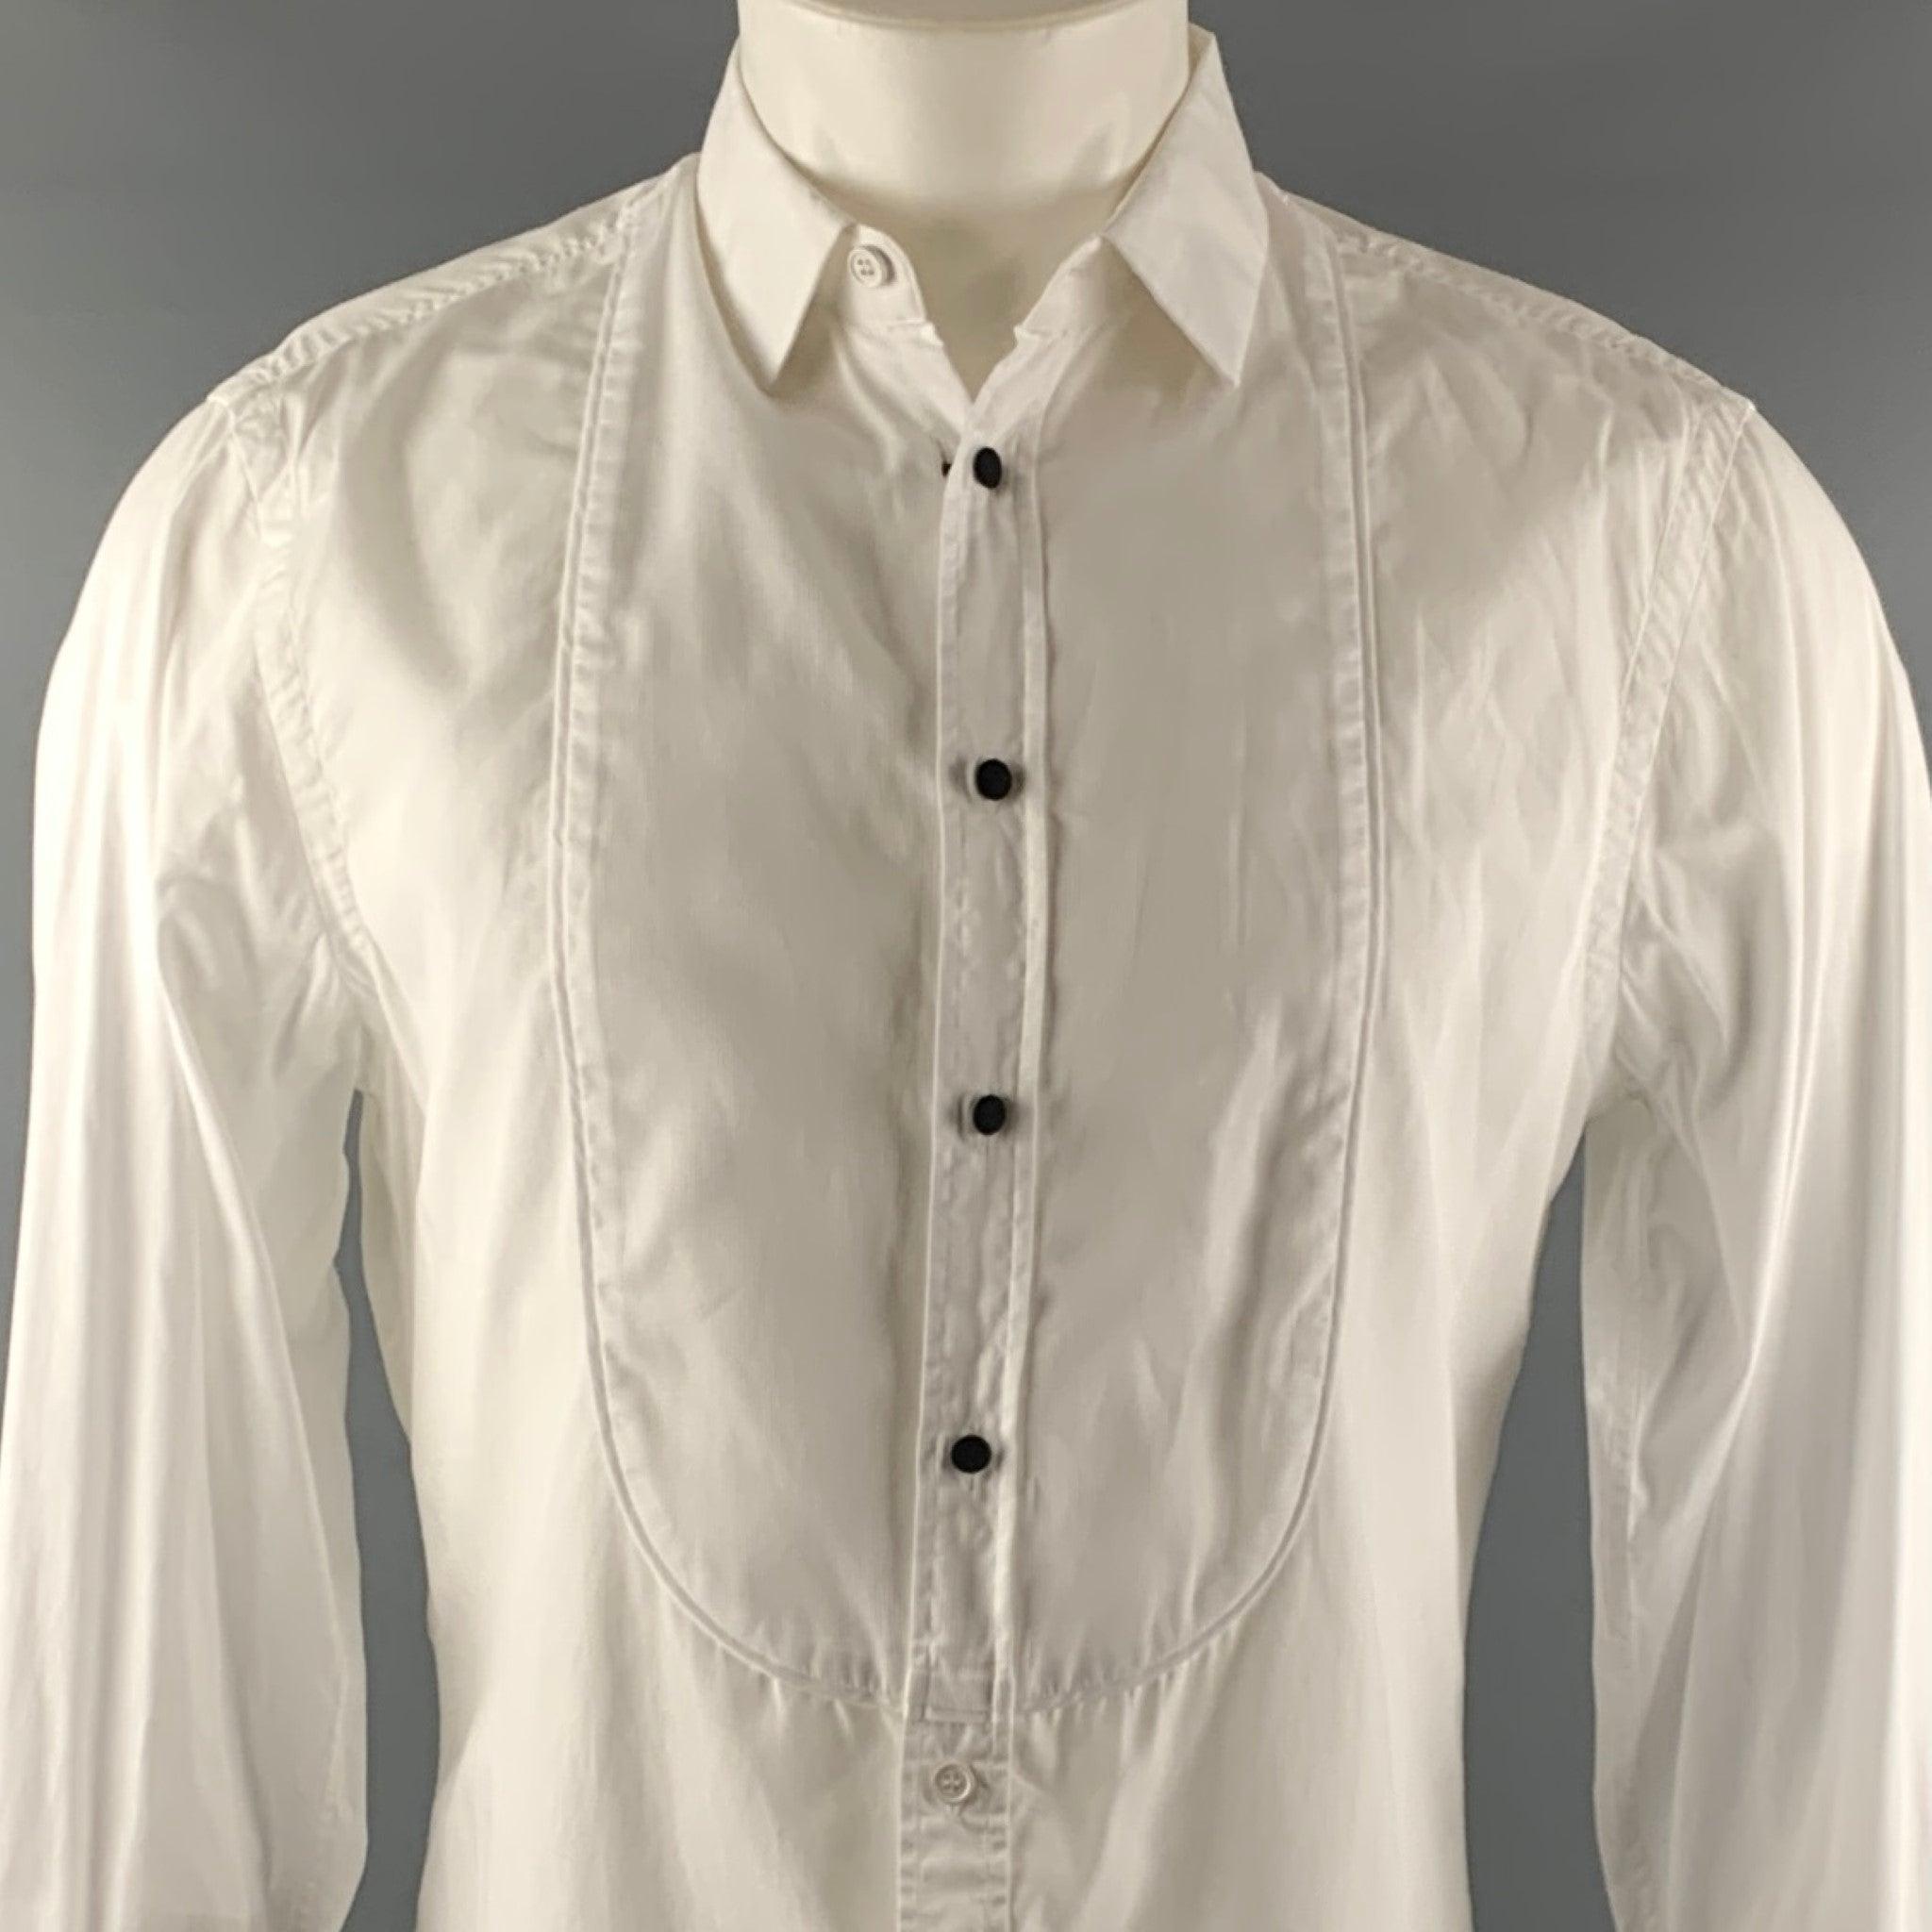 BAND OF OUTSIDERS
tuxedo shirt in a white cotton featuring a bib-style front, French cuffs, and a spread collar. Made in Italy.Very Good Pre-Owned Condition. Minor signs of wear. 

Marked:   size not marked 

Measurements: 
 
Shoulder: 17.5 inches